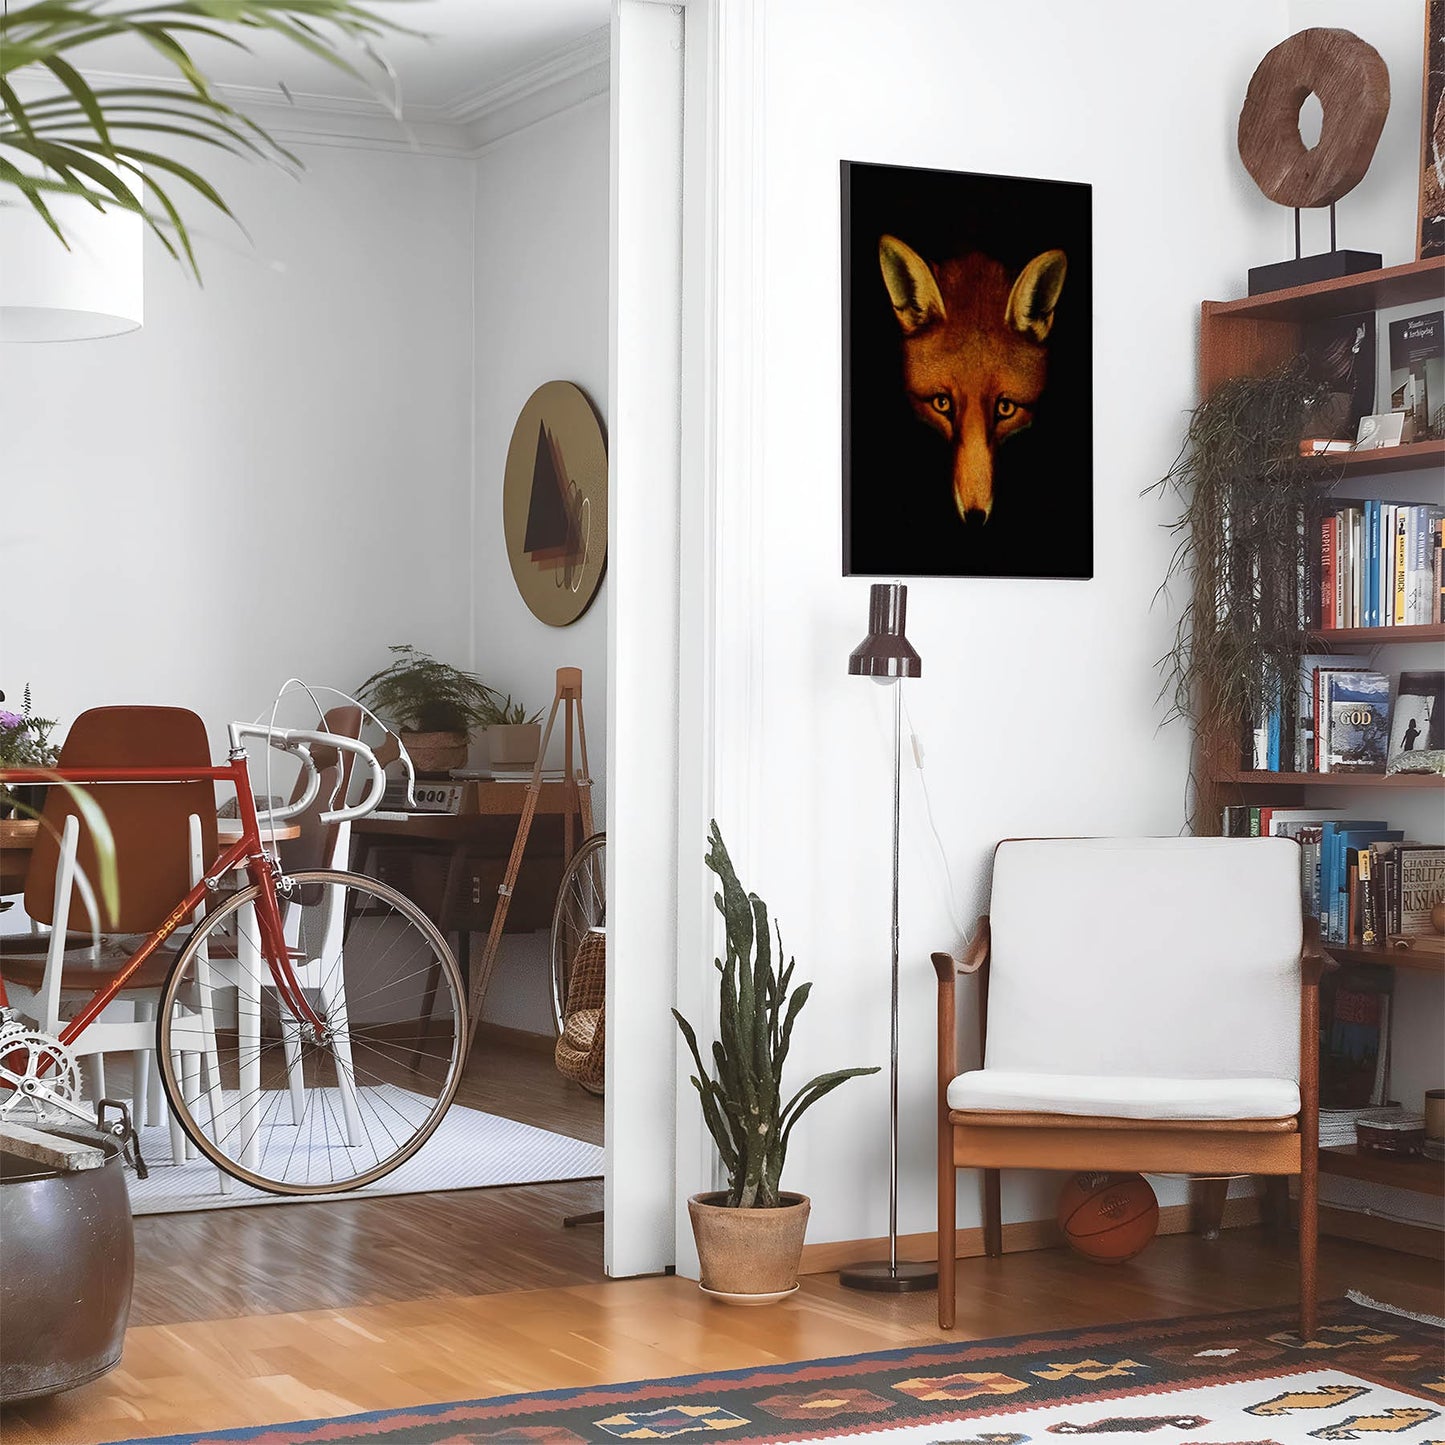 Eclectic living room with a road bike, bookshelf and house plants that features framed artwork of a Large Red Fox Head above a chair and lamp